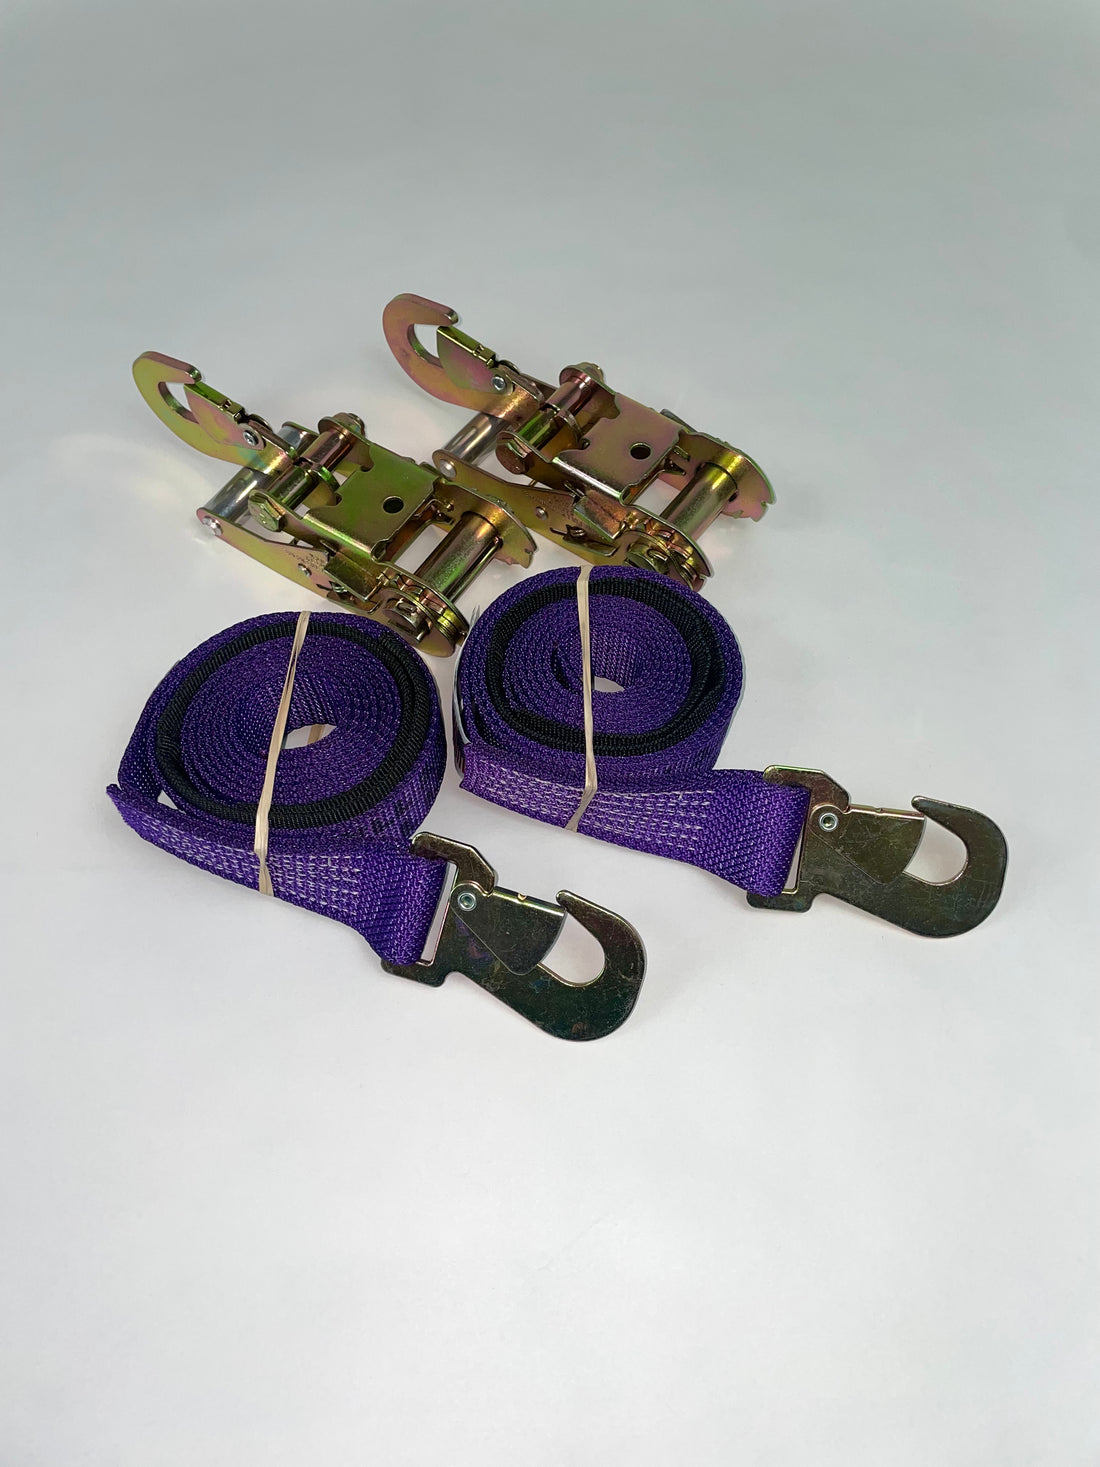 2pk Snap Hook straps with Snap hook ratchet / FREE SHIPPING